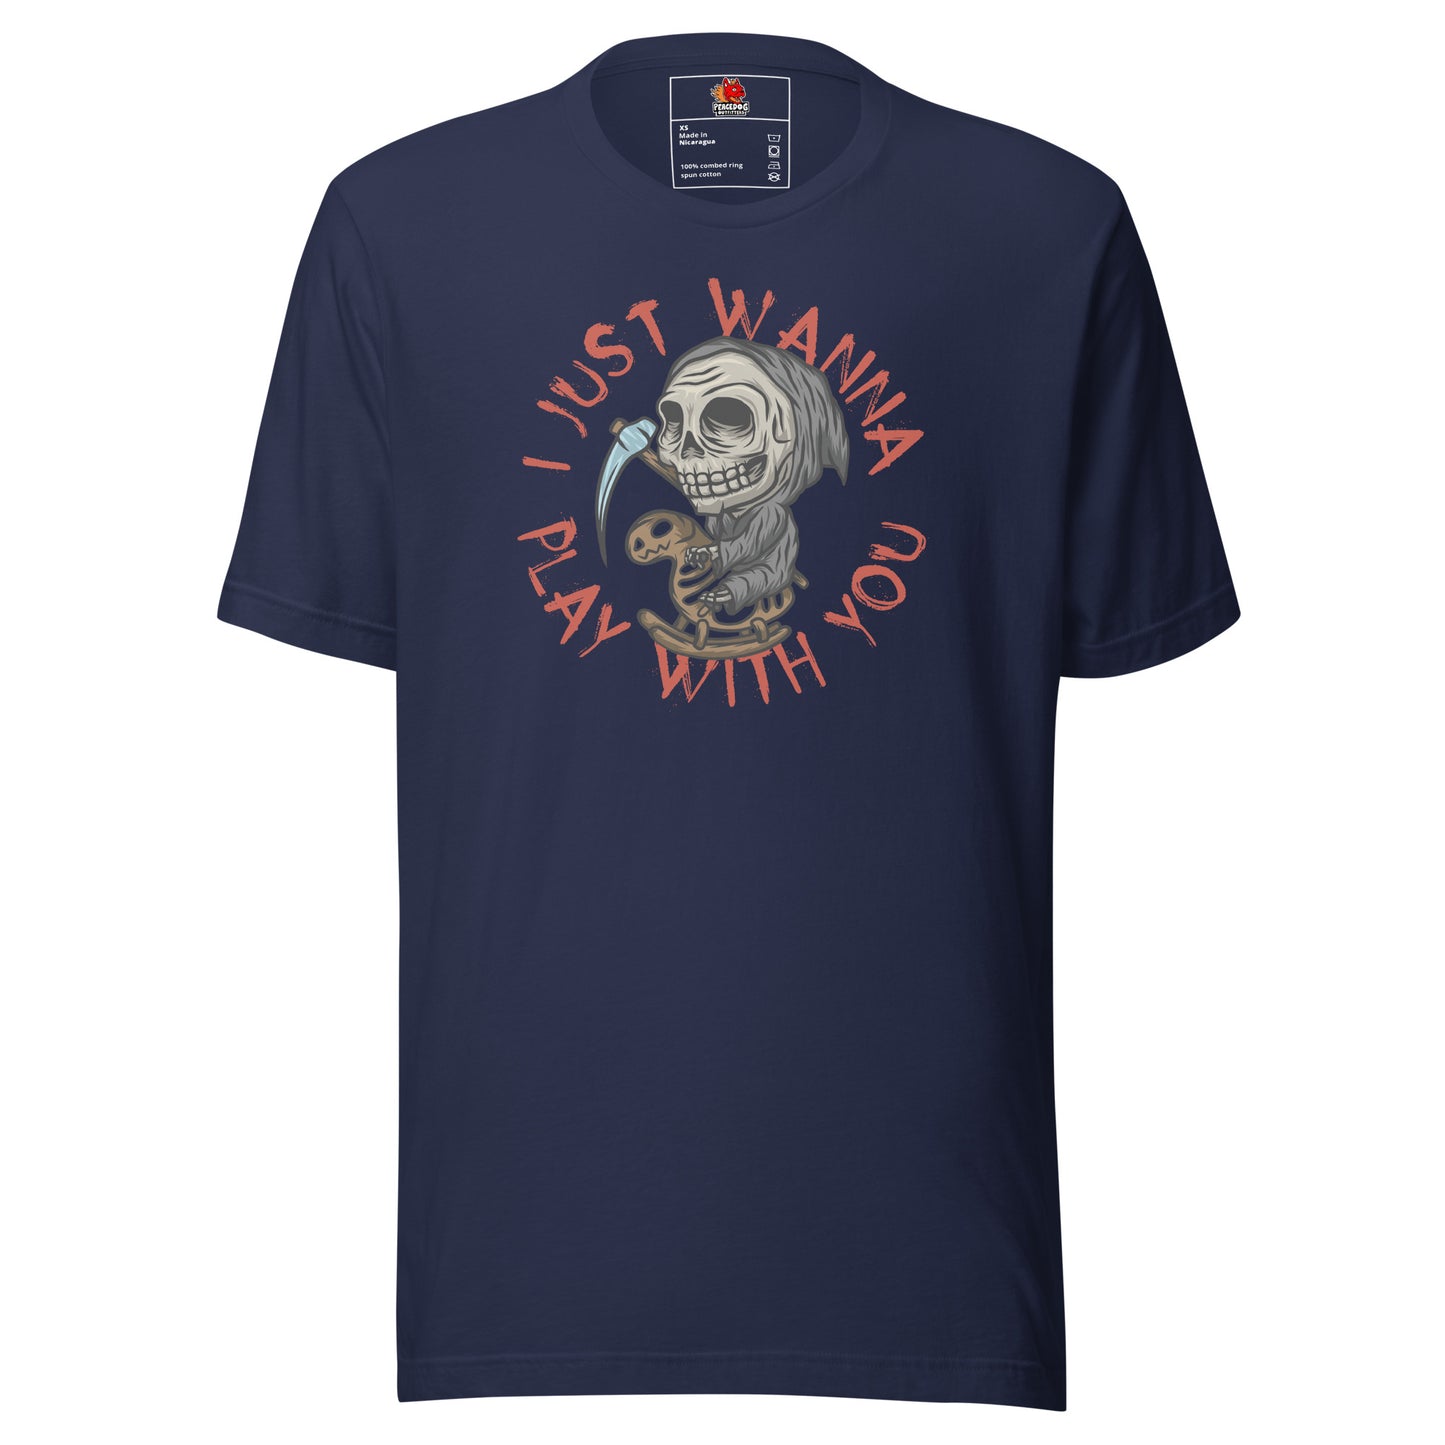 I Just Wanna Play With You Grim Reaper T-shirt